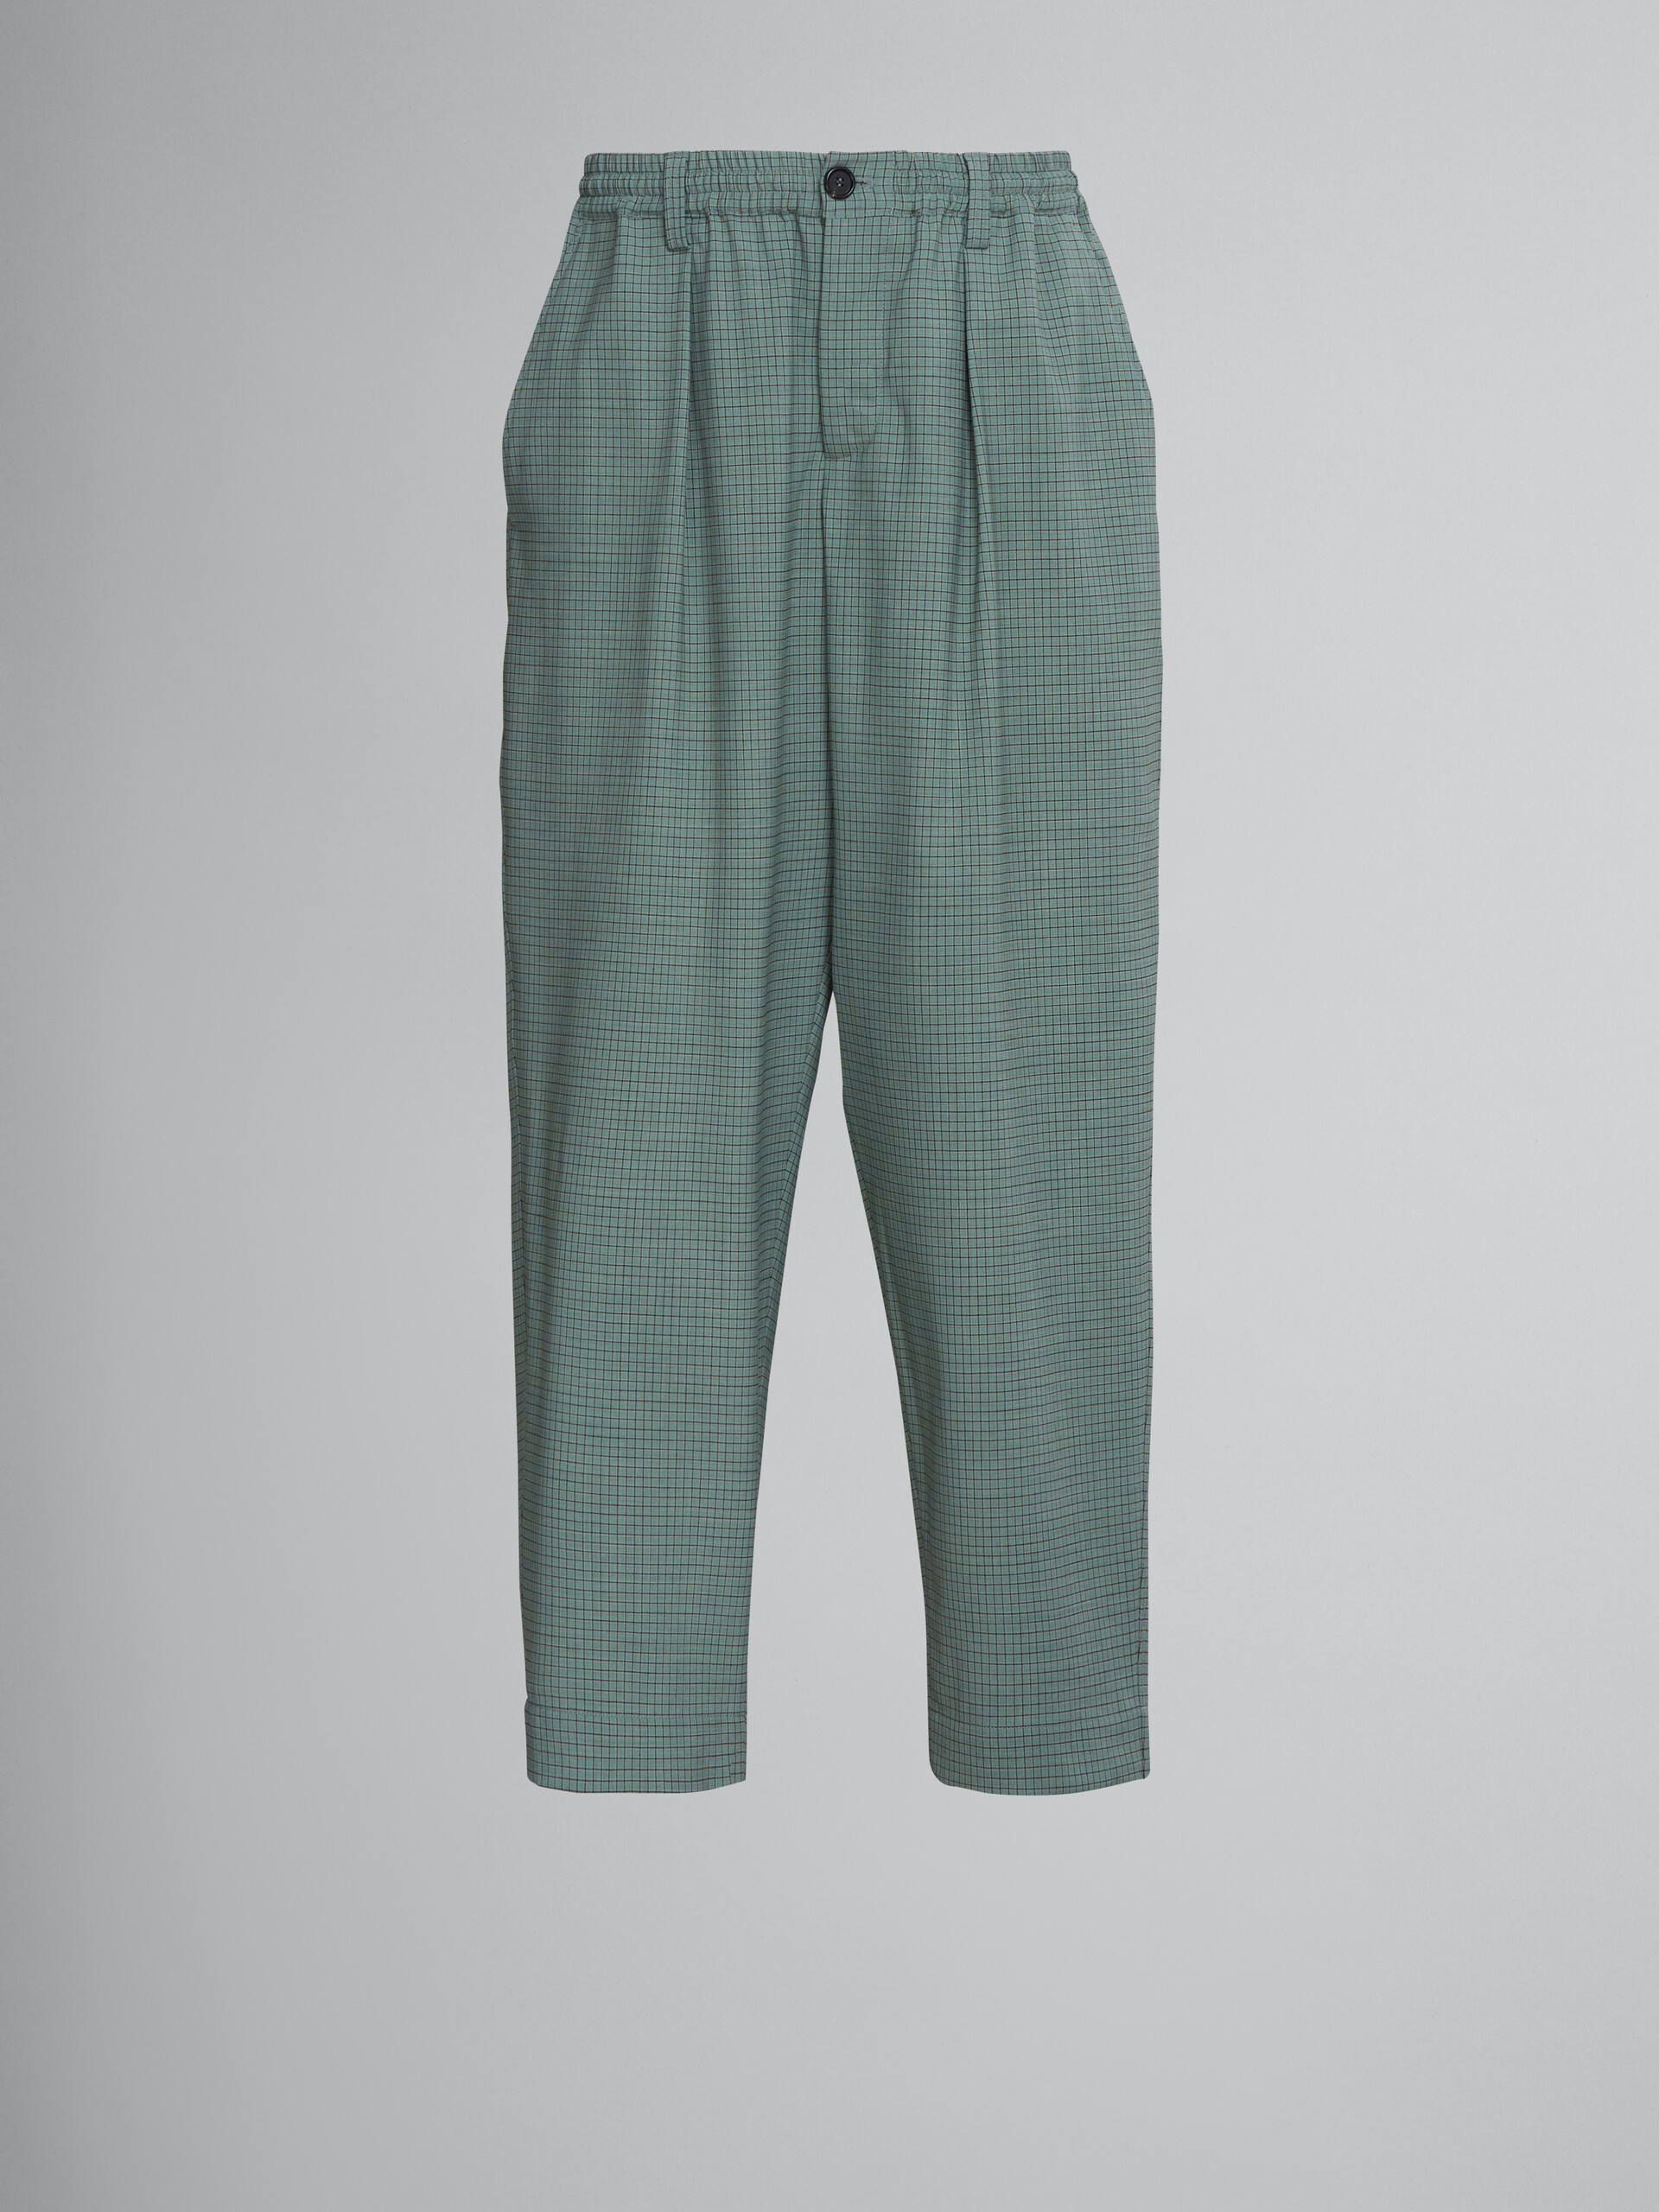 Green cropped trousers in tropical wool with checks - Pants - Image 1